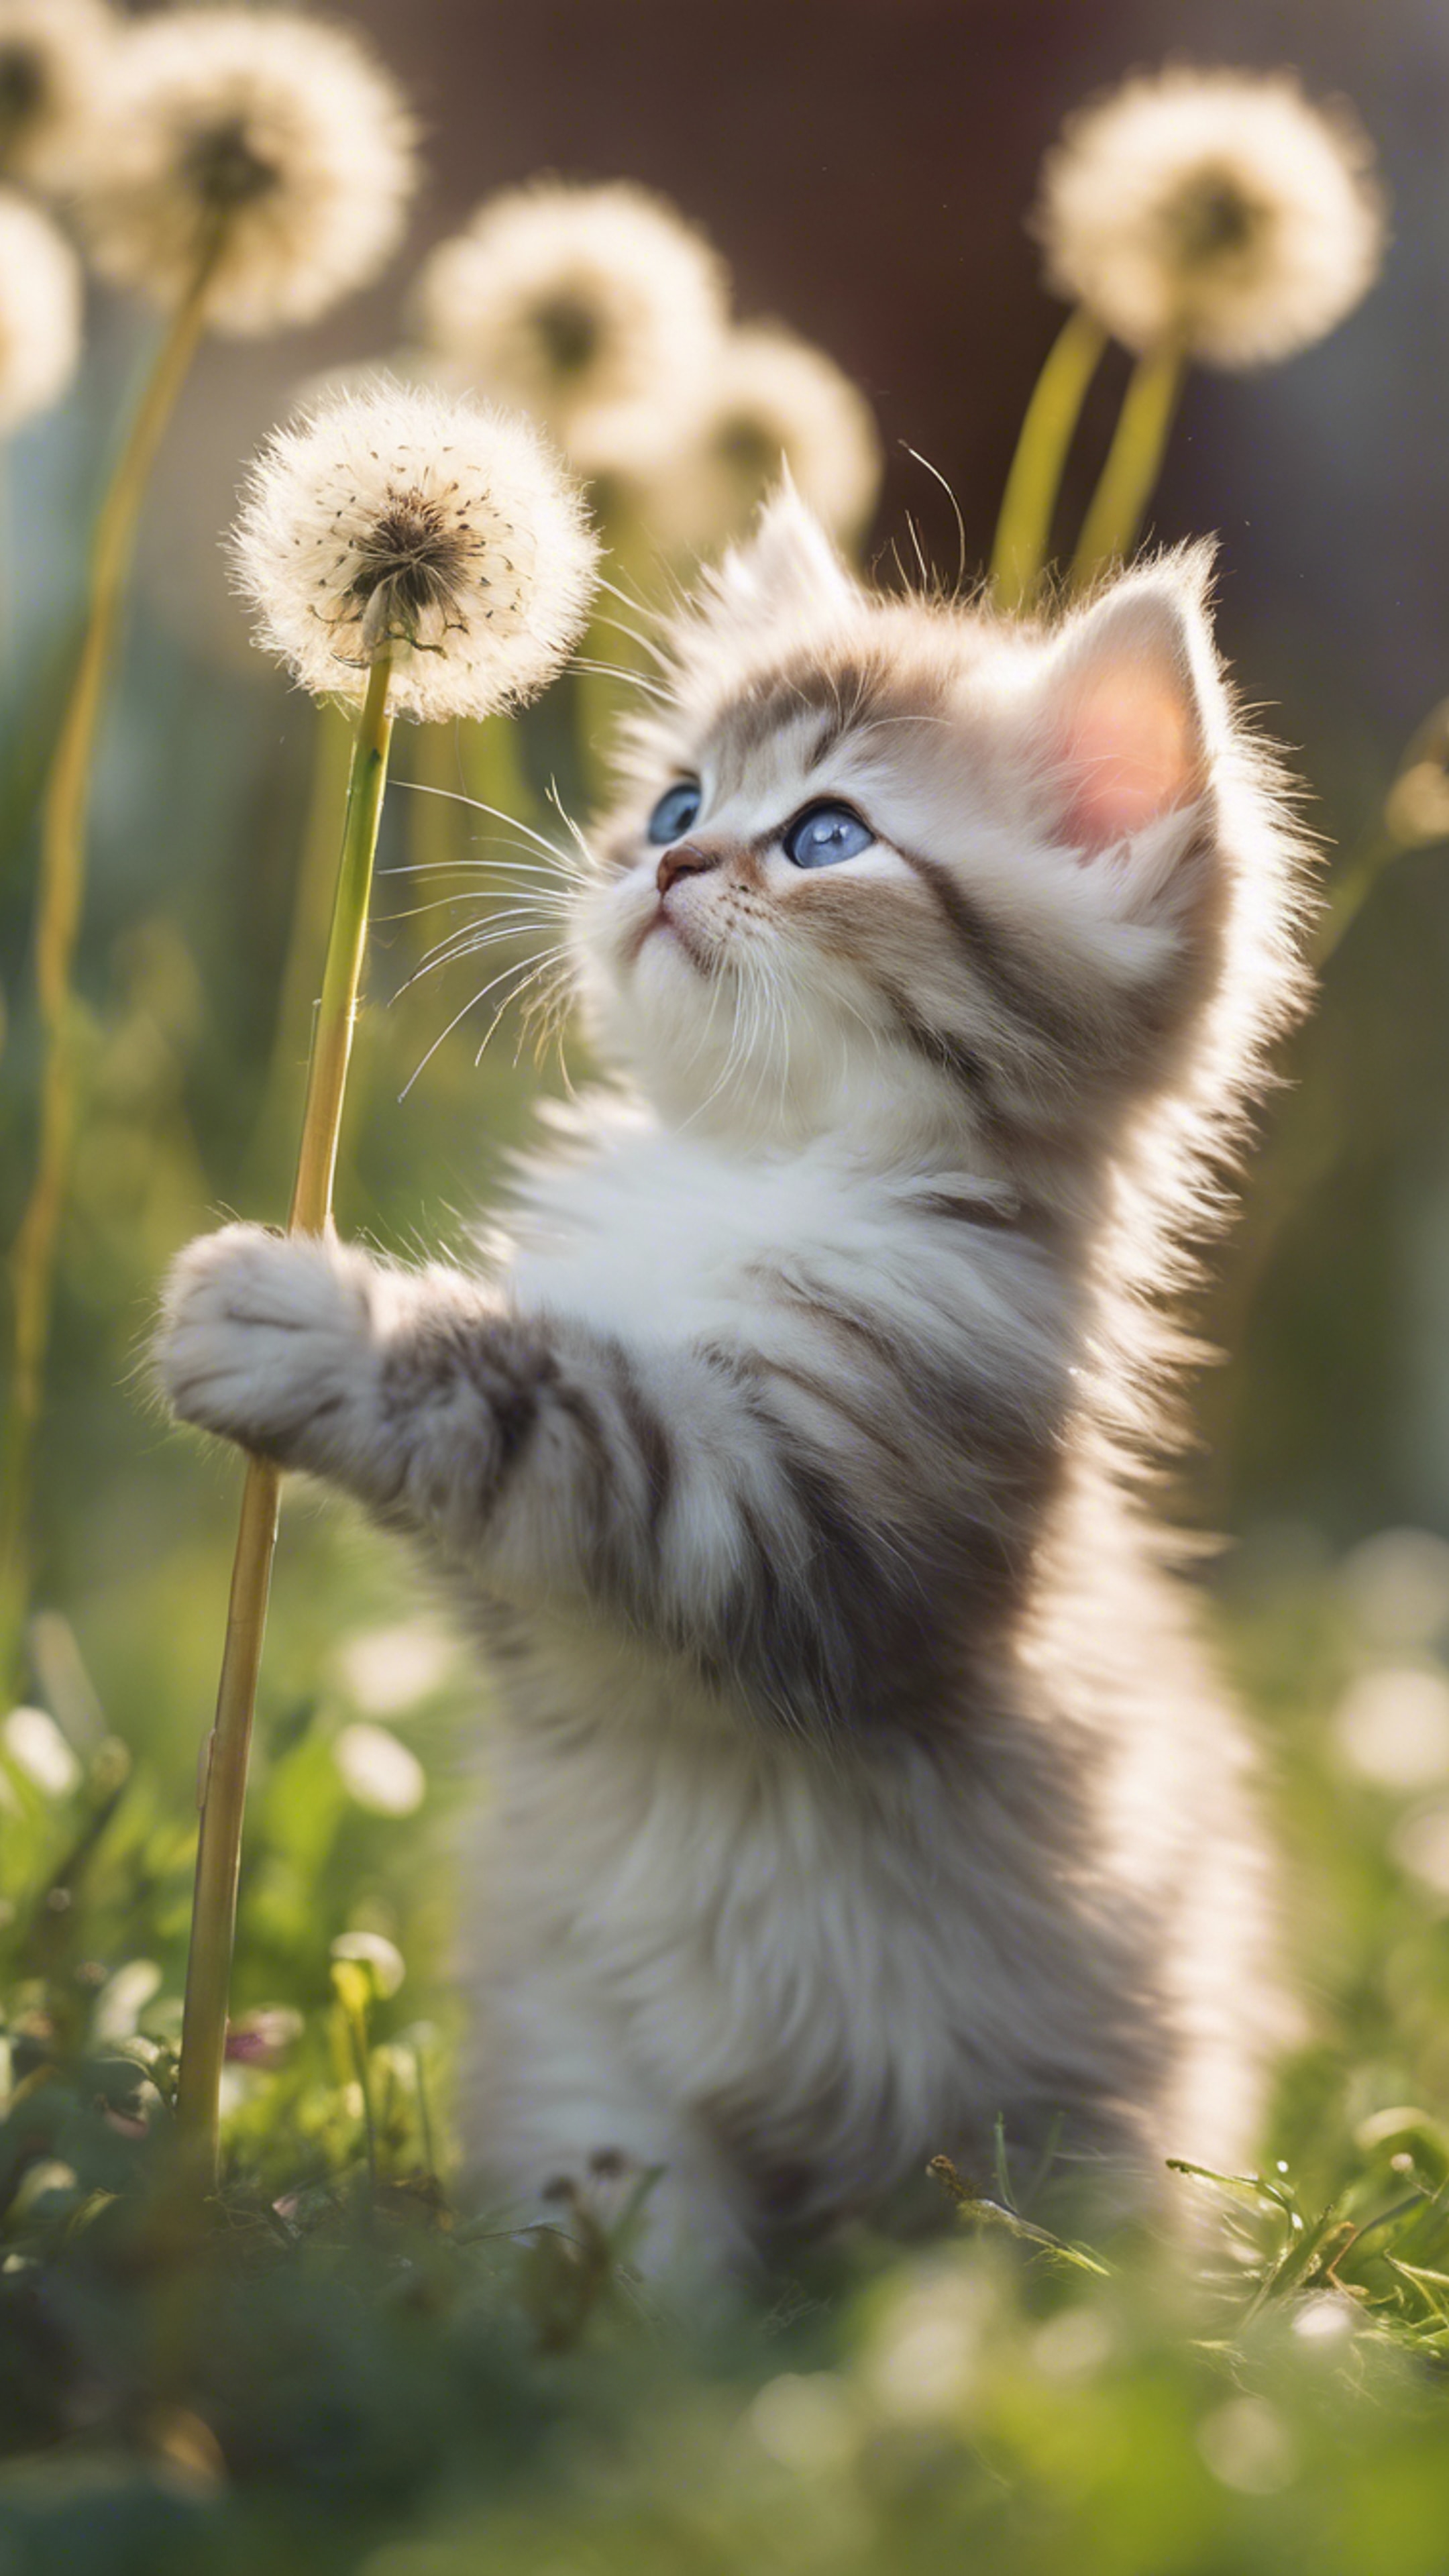 A curious Persian kitten playfully batting at a dandelishion puff in the midst of spring bloom. Tapet[a1f5779e66044a4f83a1]